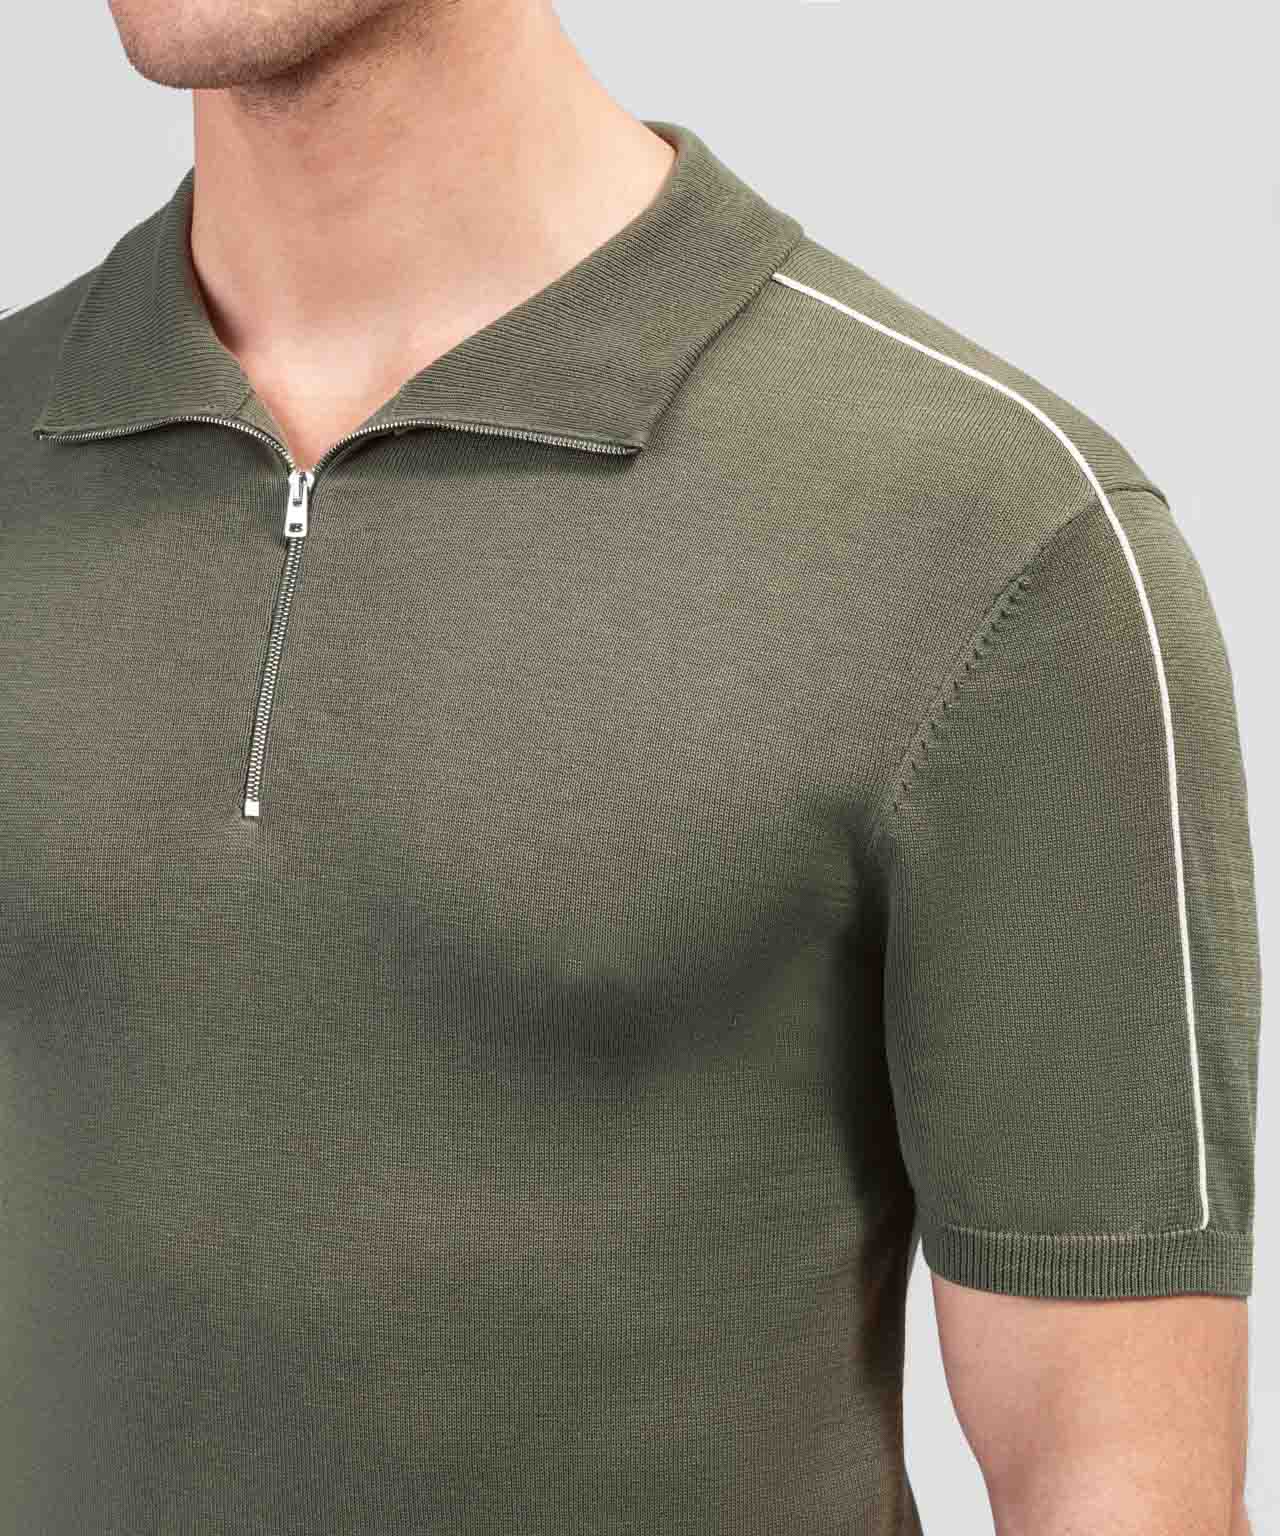 Cotton Silk RD Polo w Piping: Olive Green